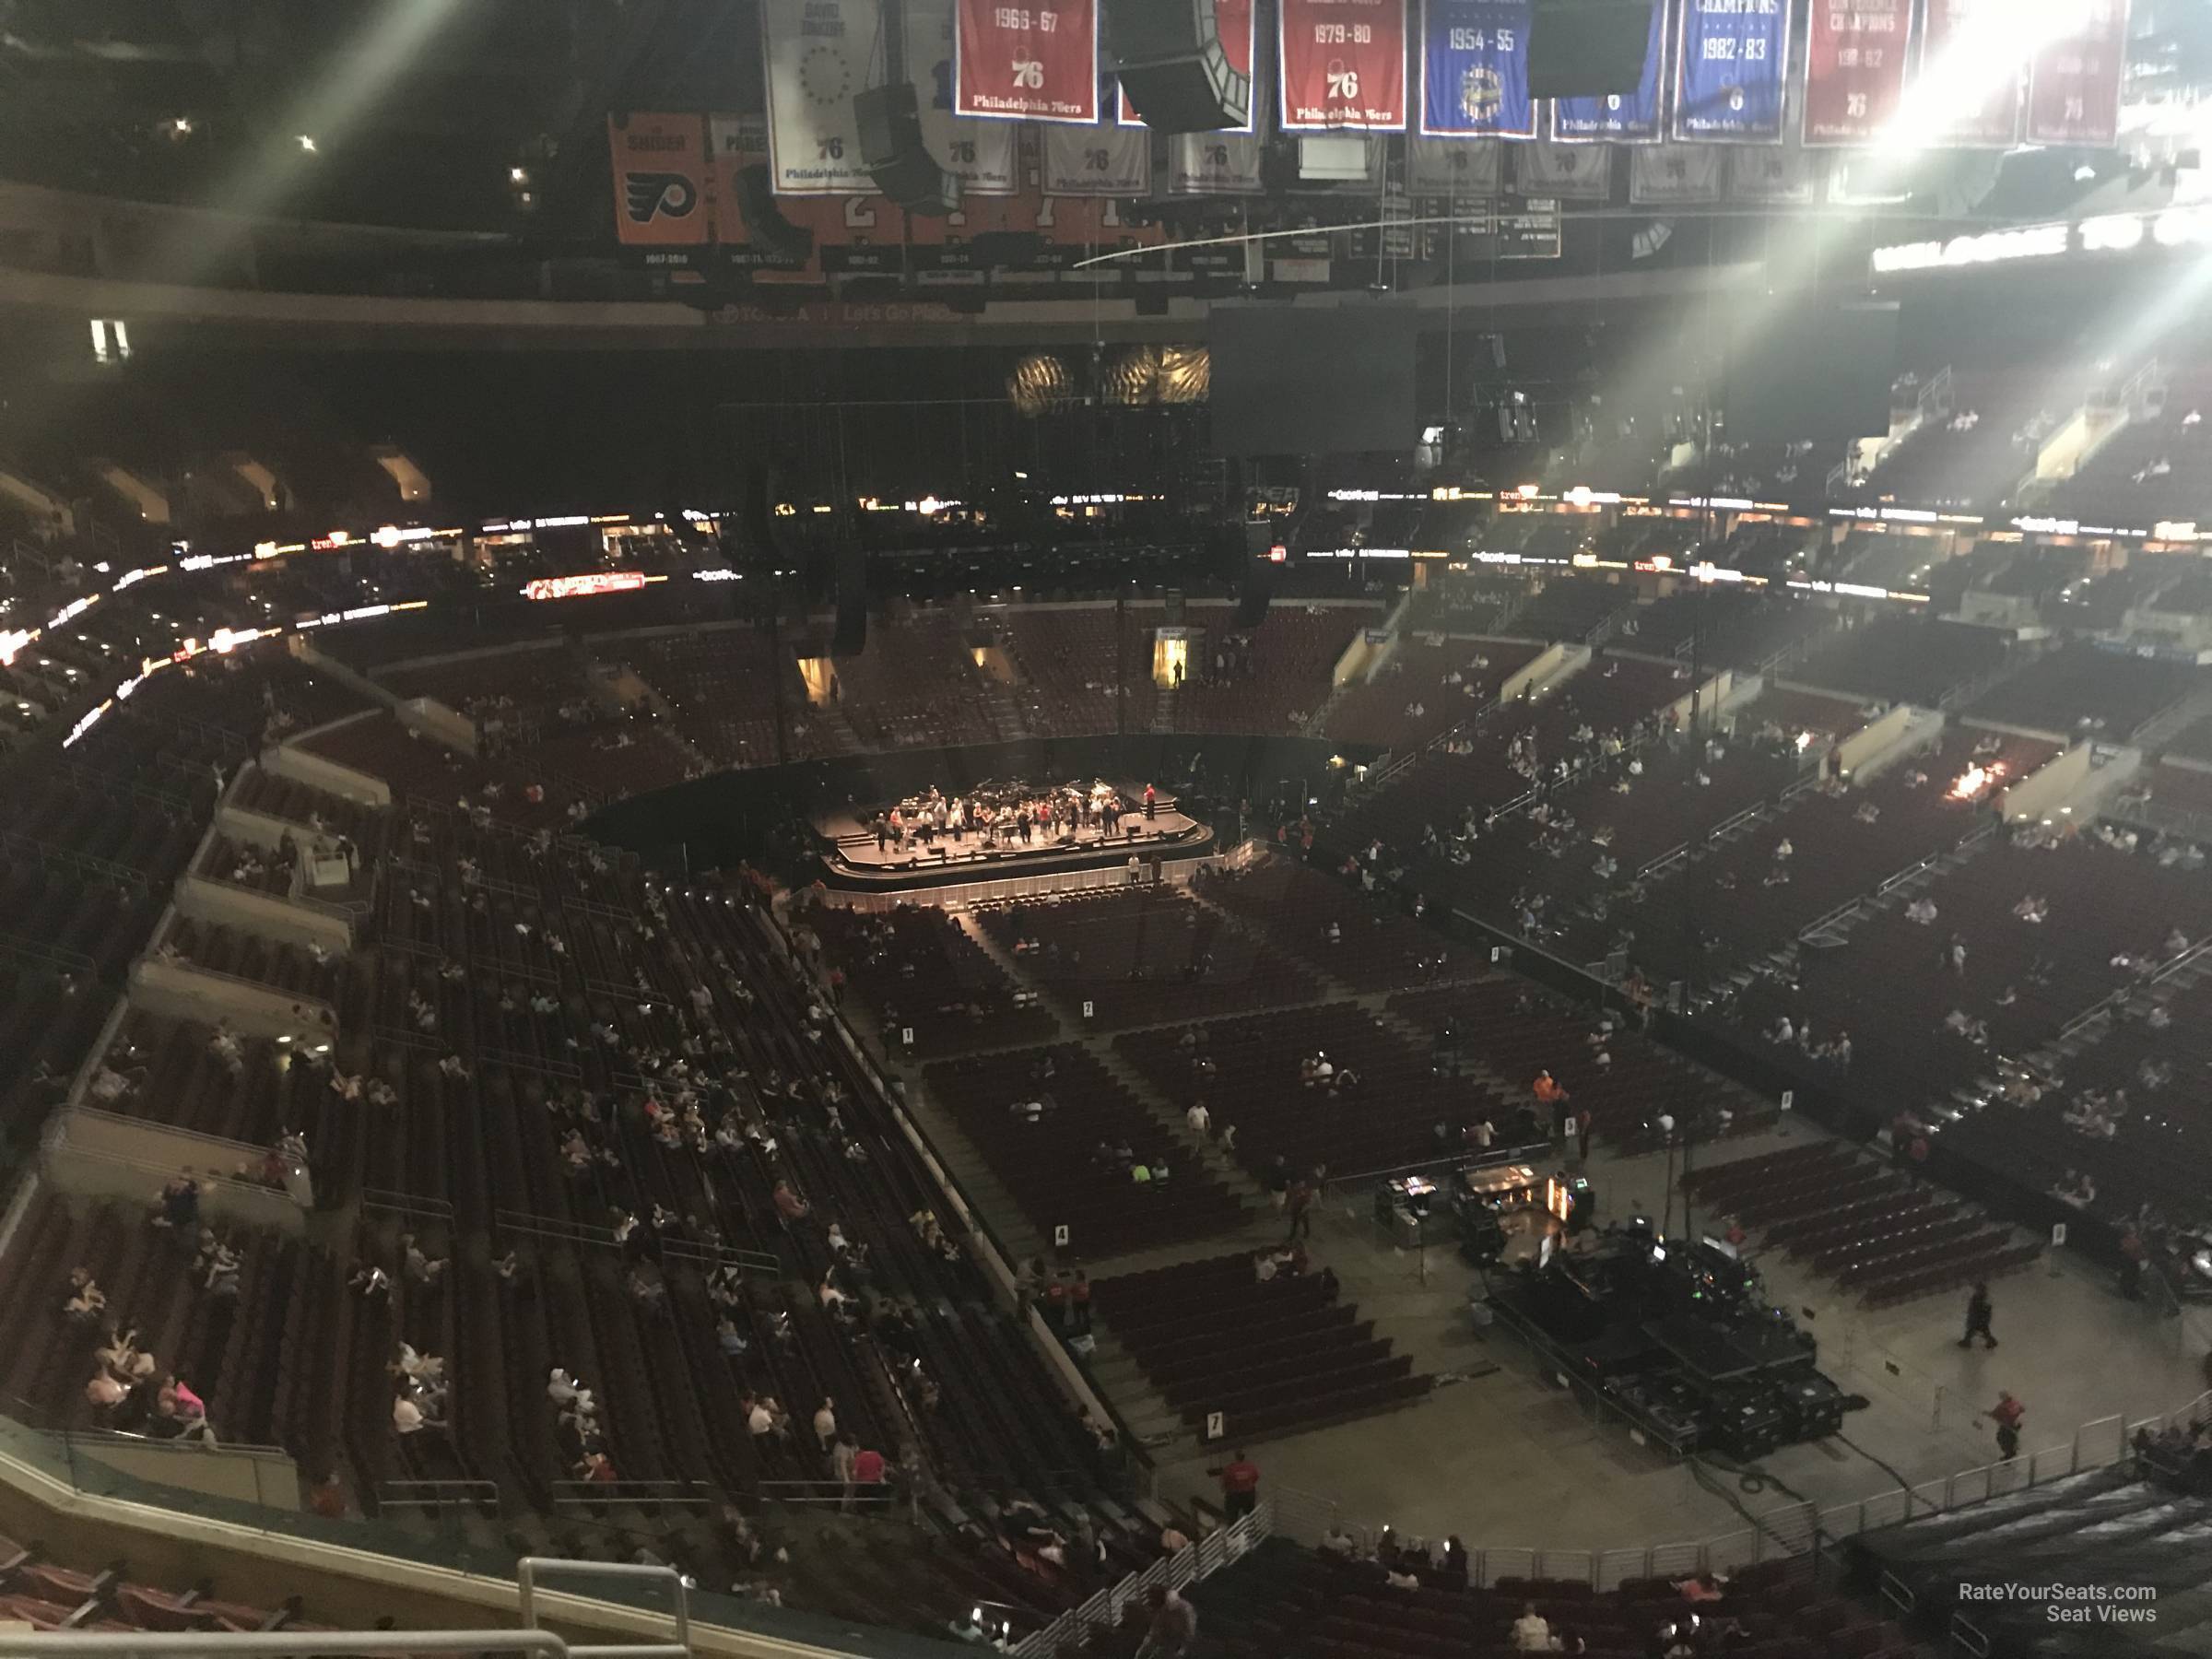 section 205a, row 7 seat view  for concert - wells fargo center